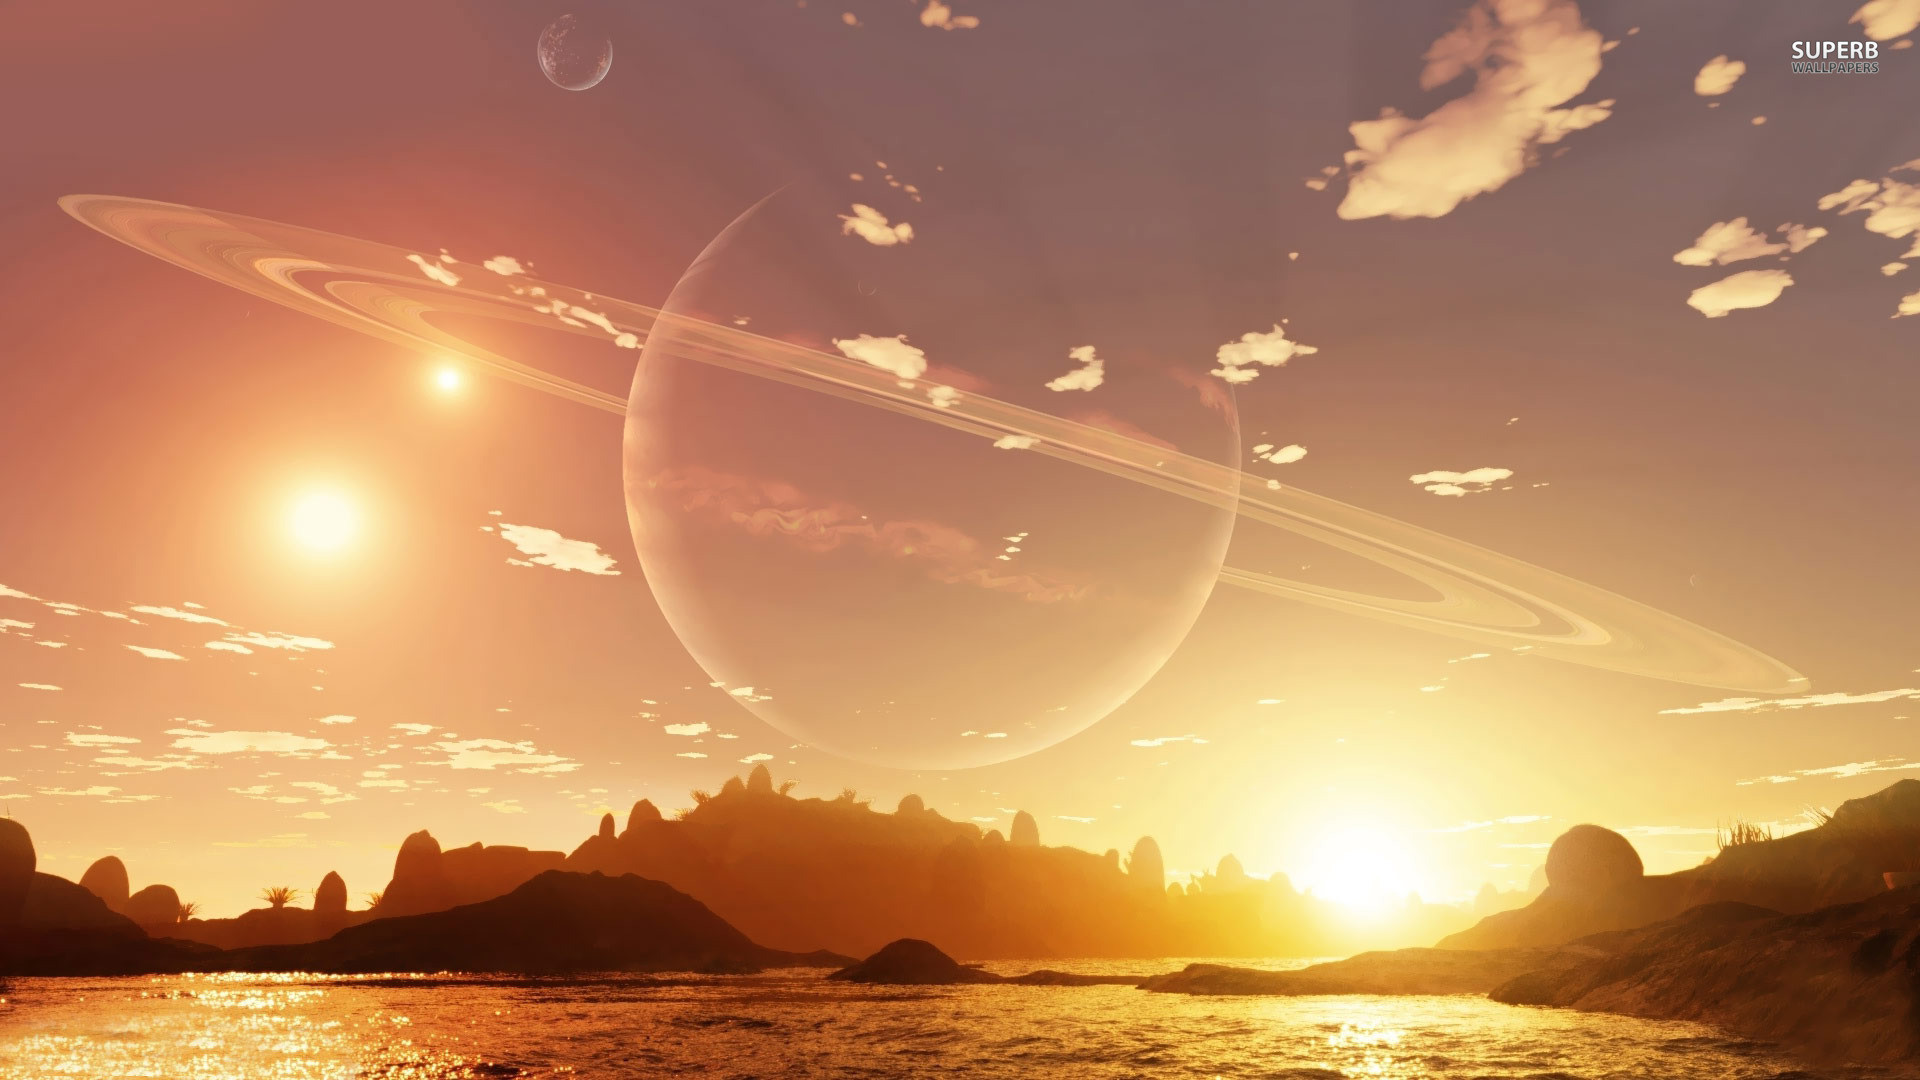 1920x1080 Planet in the sky during the day wallpaper - Fantasy wallpapers .